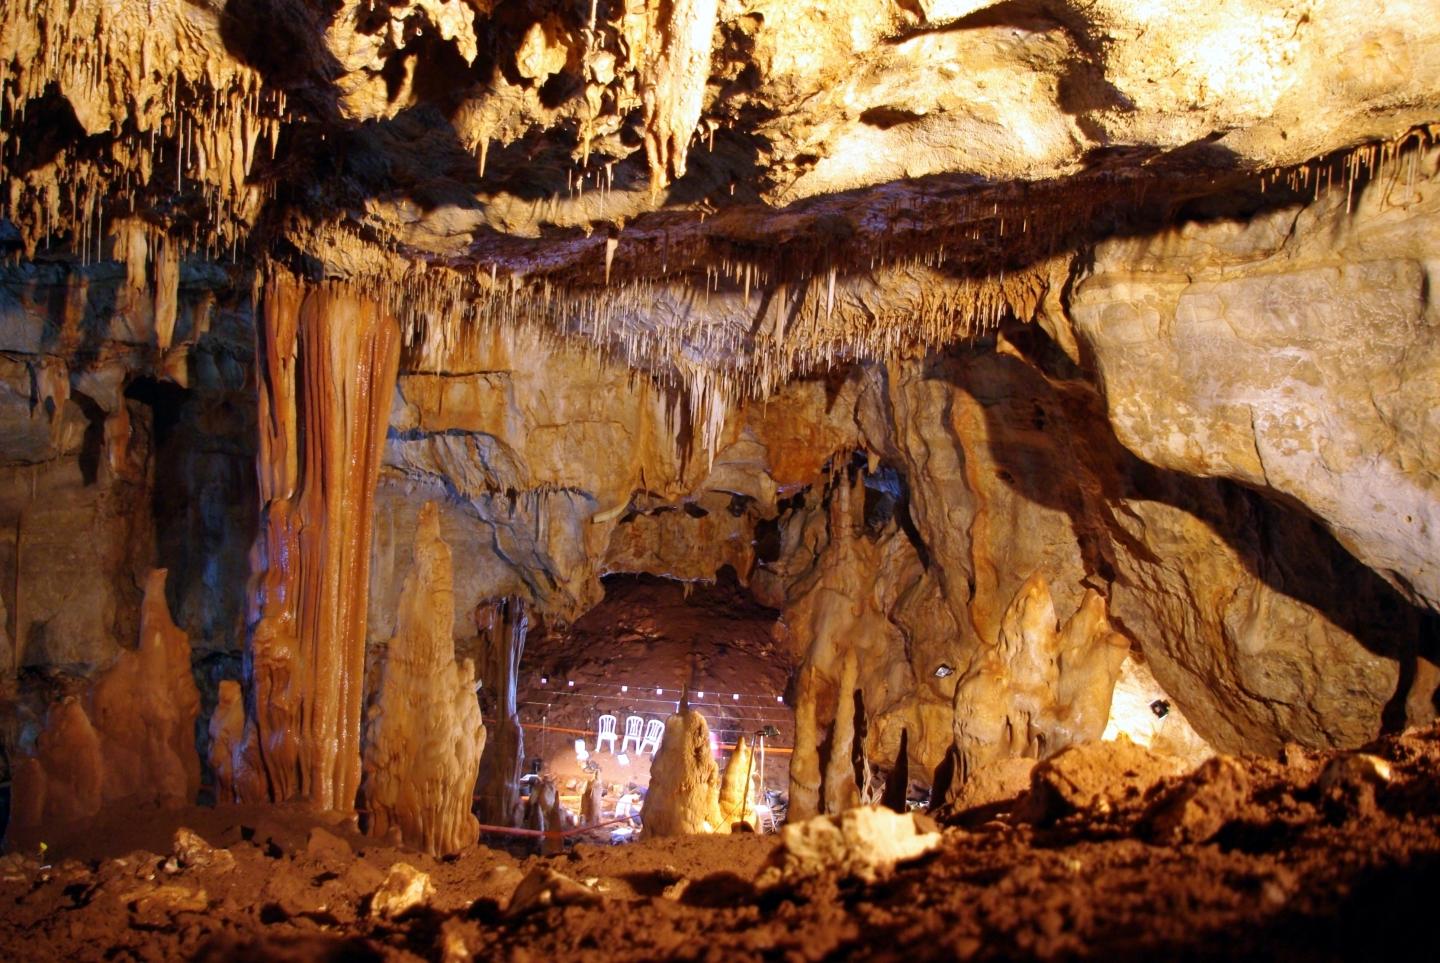 Interior of Manot Cave in Israel's Galilee